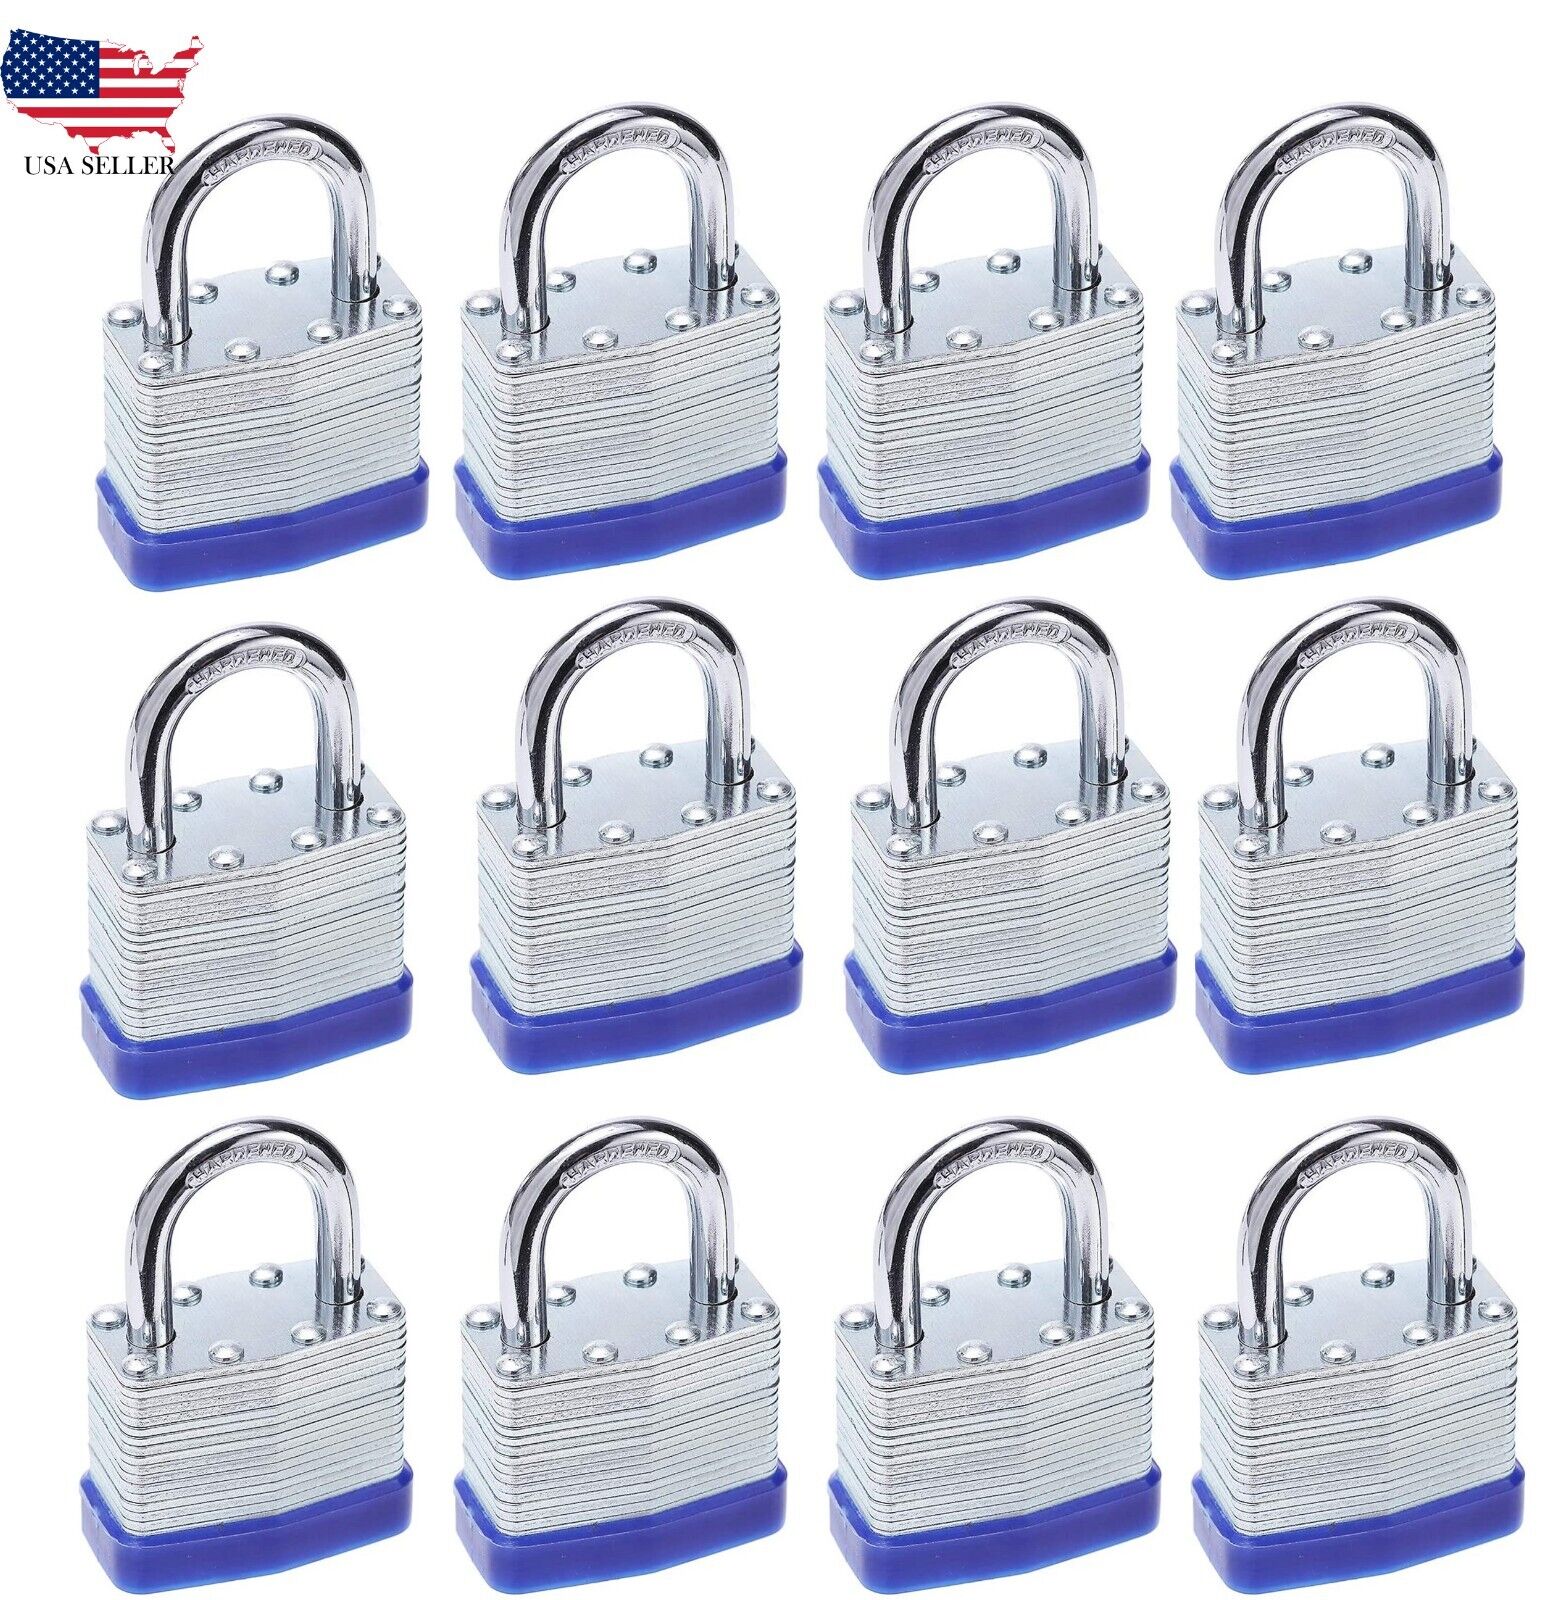 Laminated Steel Padlock with Key, Lock 1-1/4 in Wide Lock Body, Fence, 12 Pack